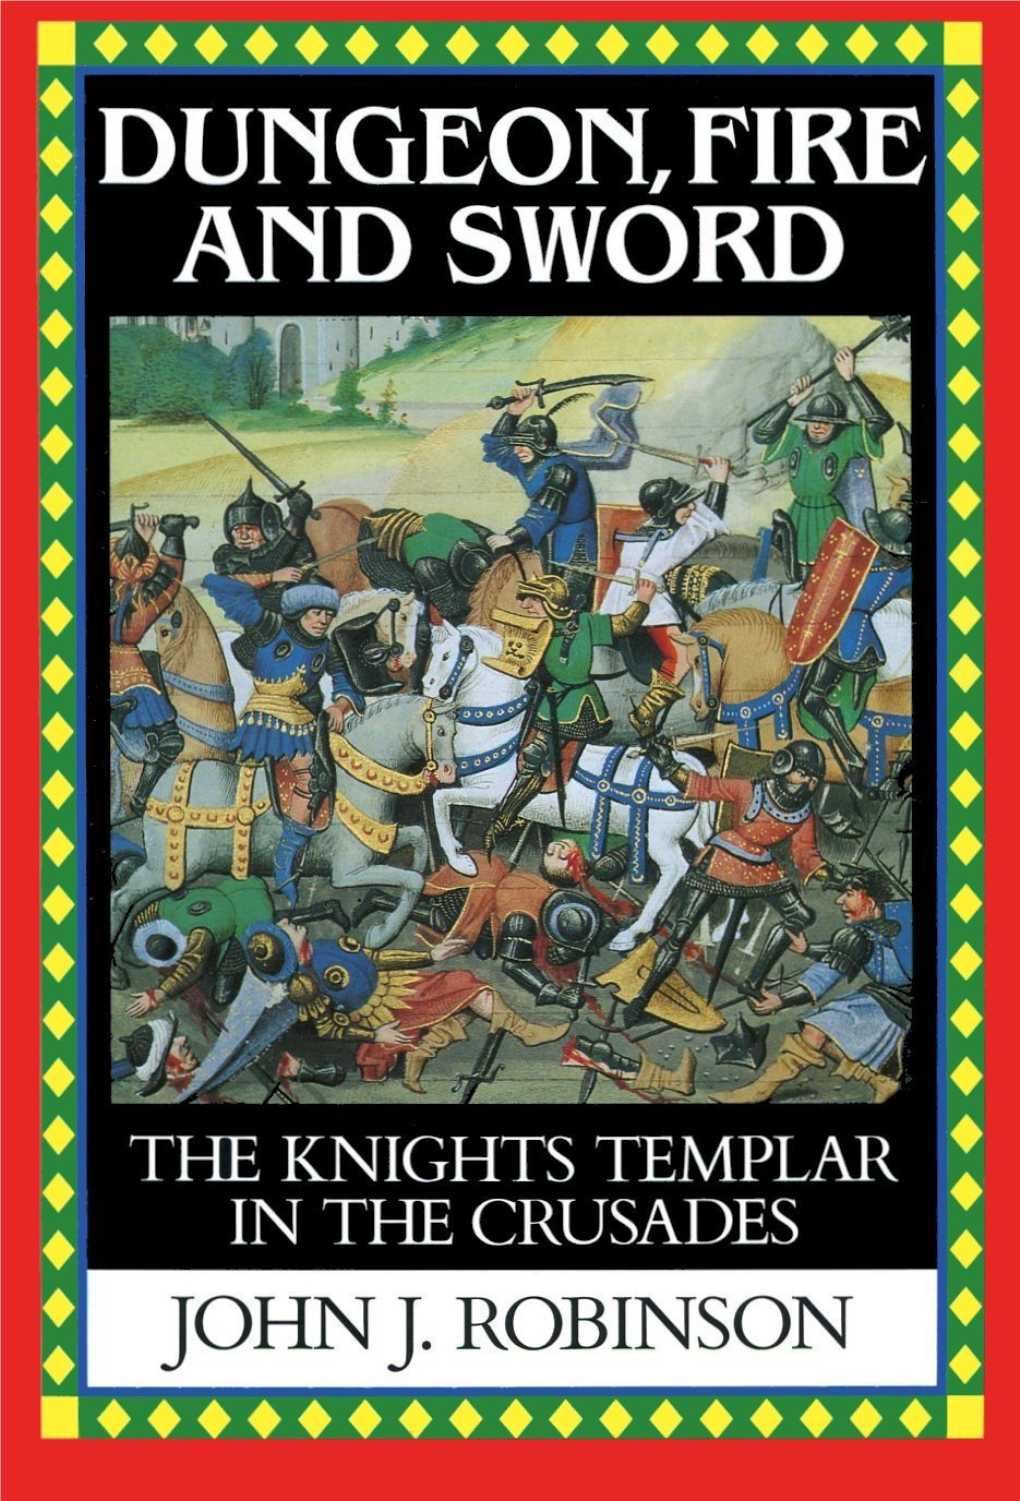 Dungeon, Fire and Sword, the Knights Templar in the Crusades